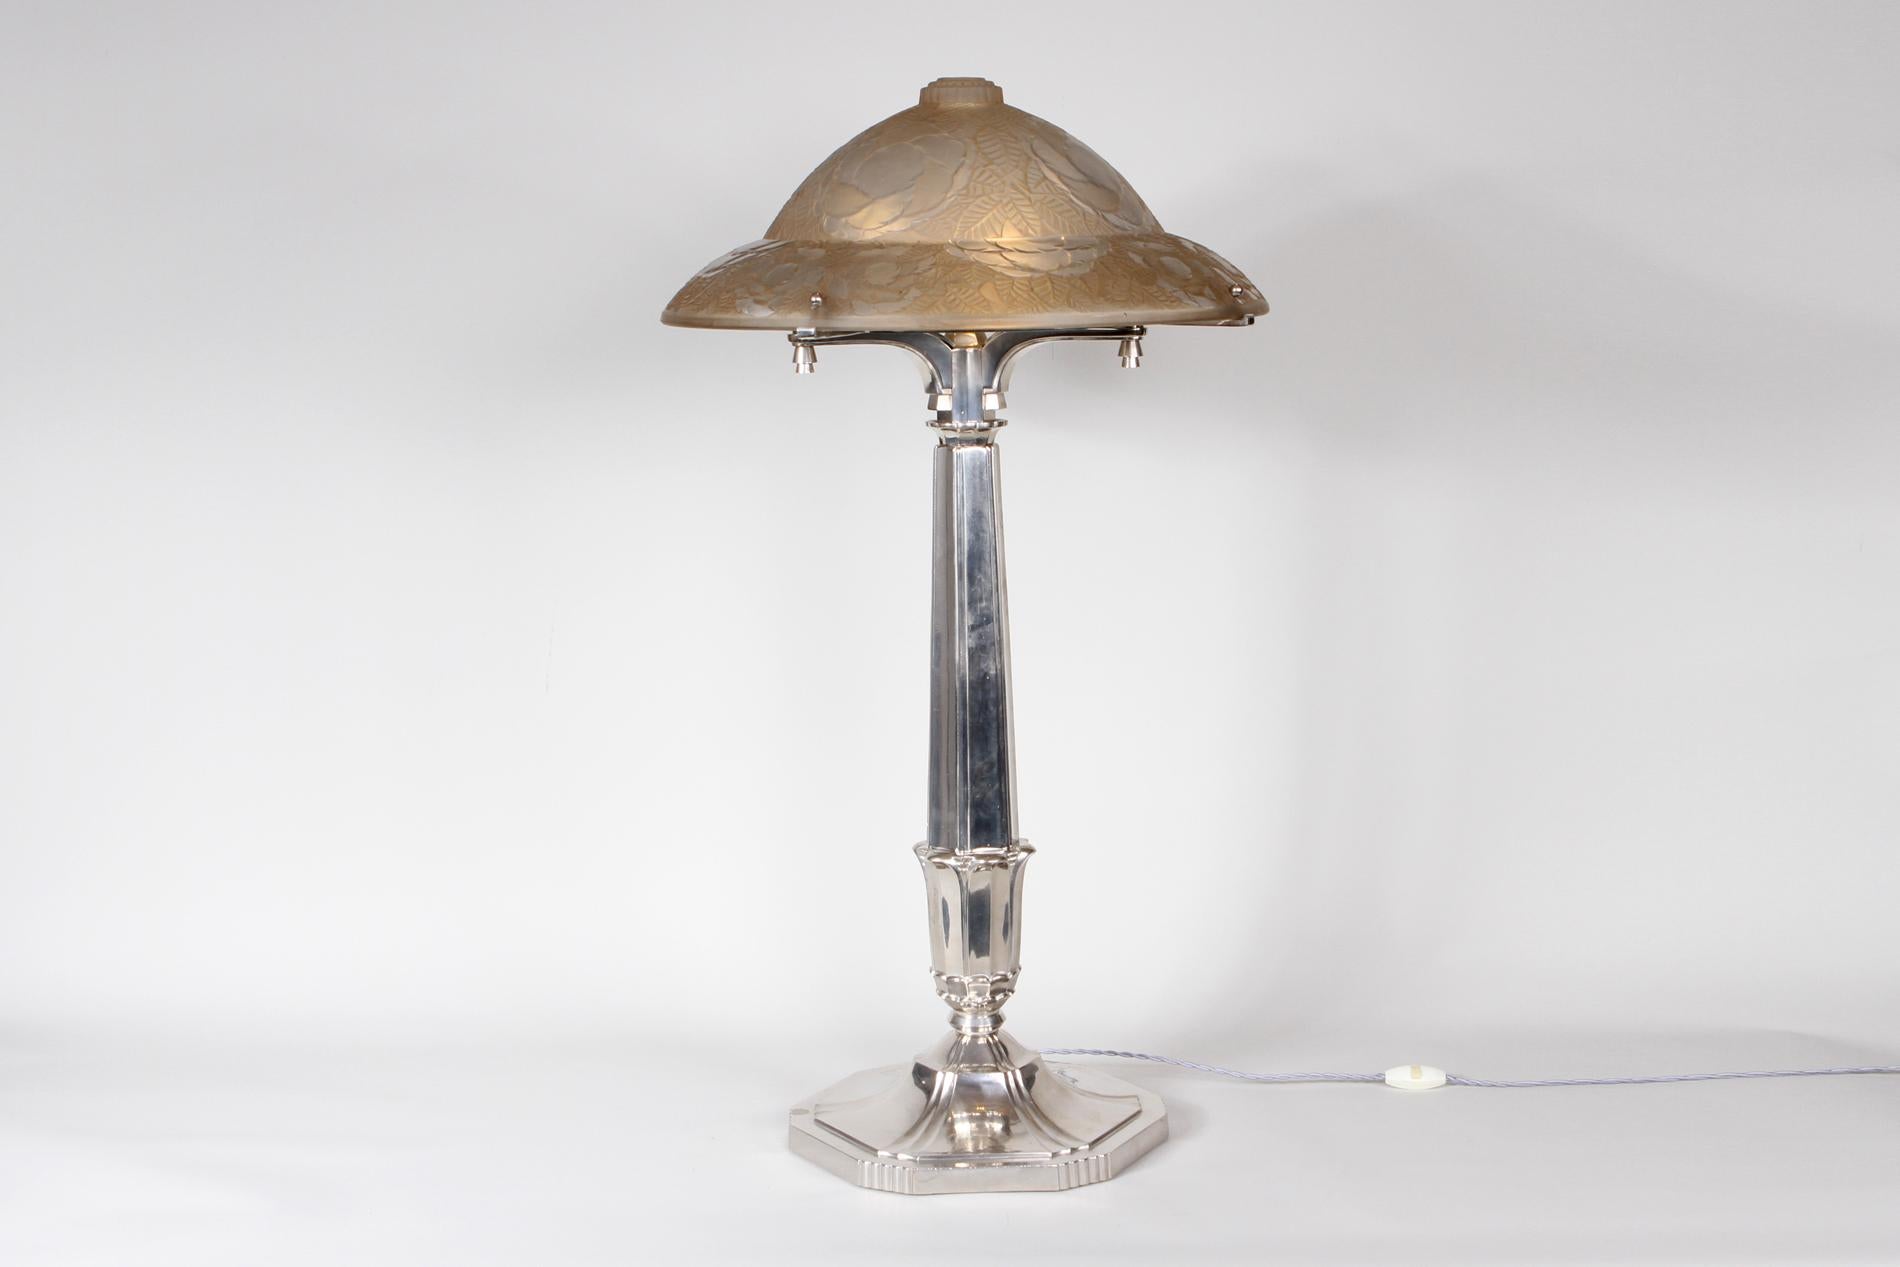 French Art Deco big table lamp from 1930 by Simonet frères.

The glass is patinated and color Sepia, the base is in nickeled bronze. The floral and elegant decor of the glass is typical from Simonet frères work. The model is one of the biggest and